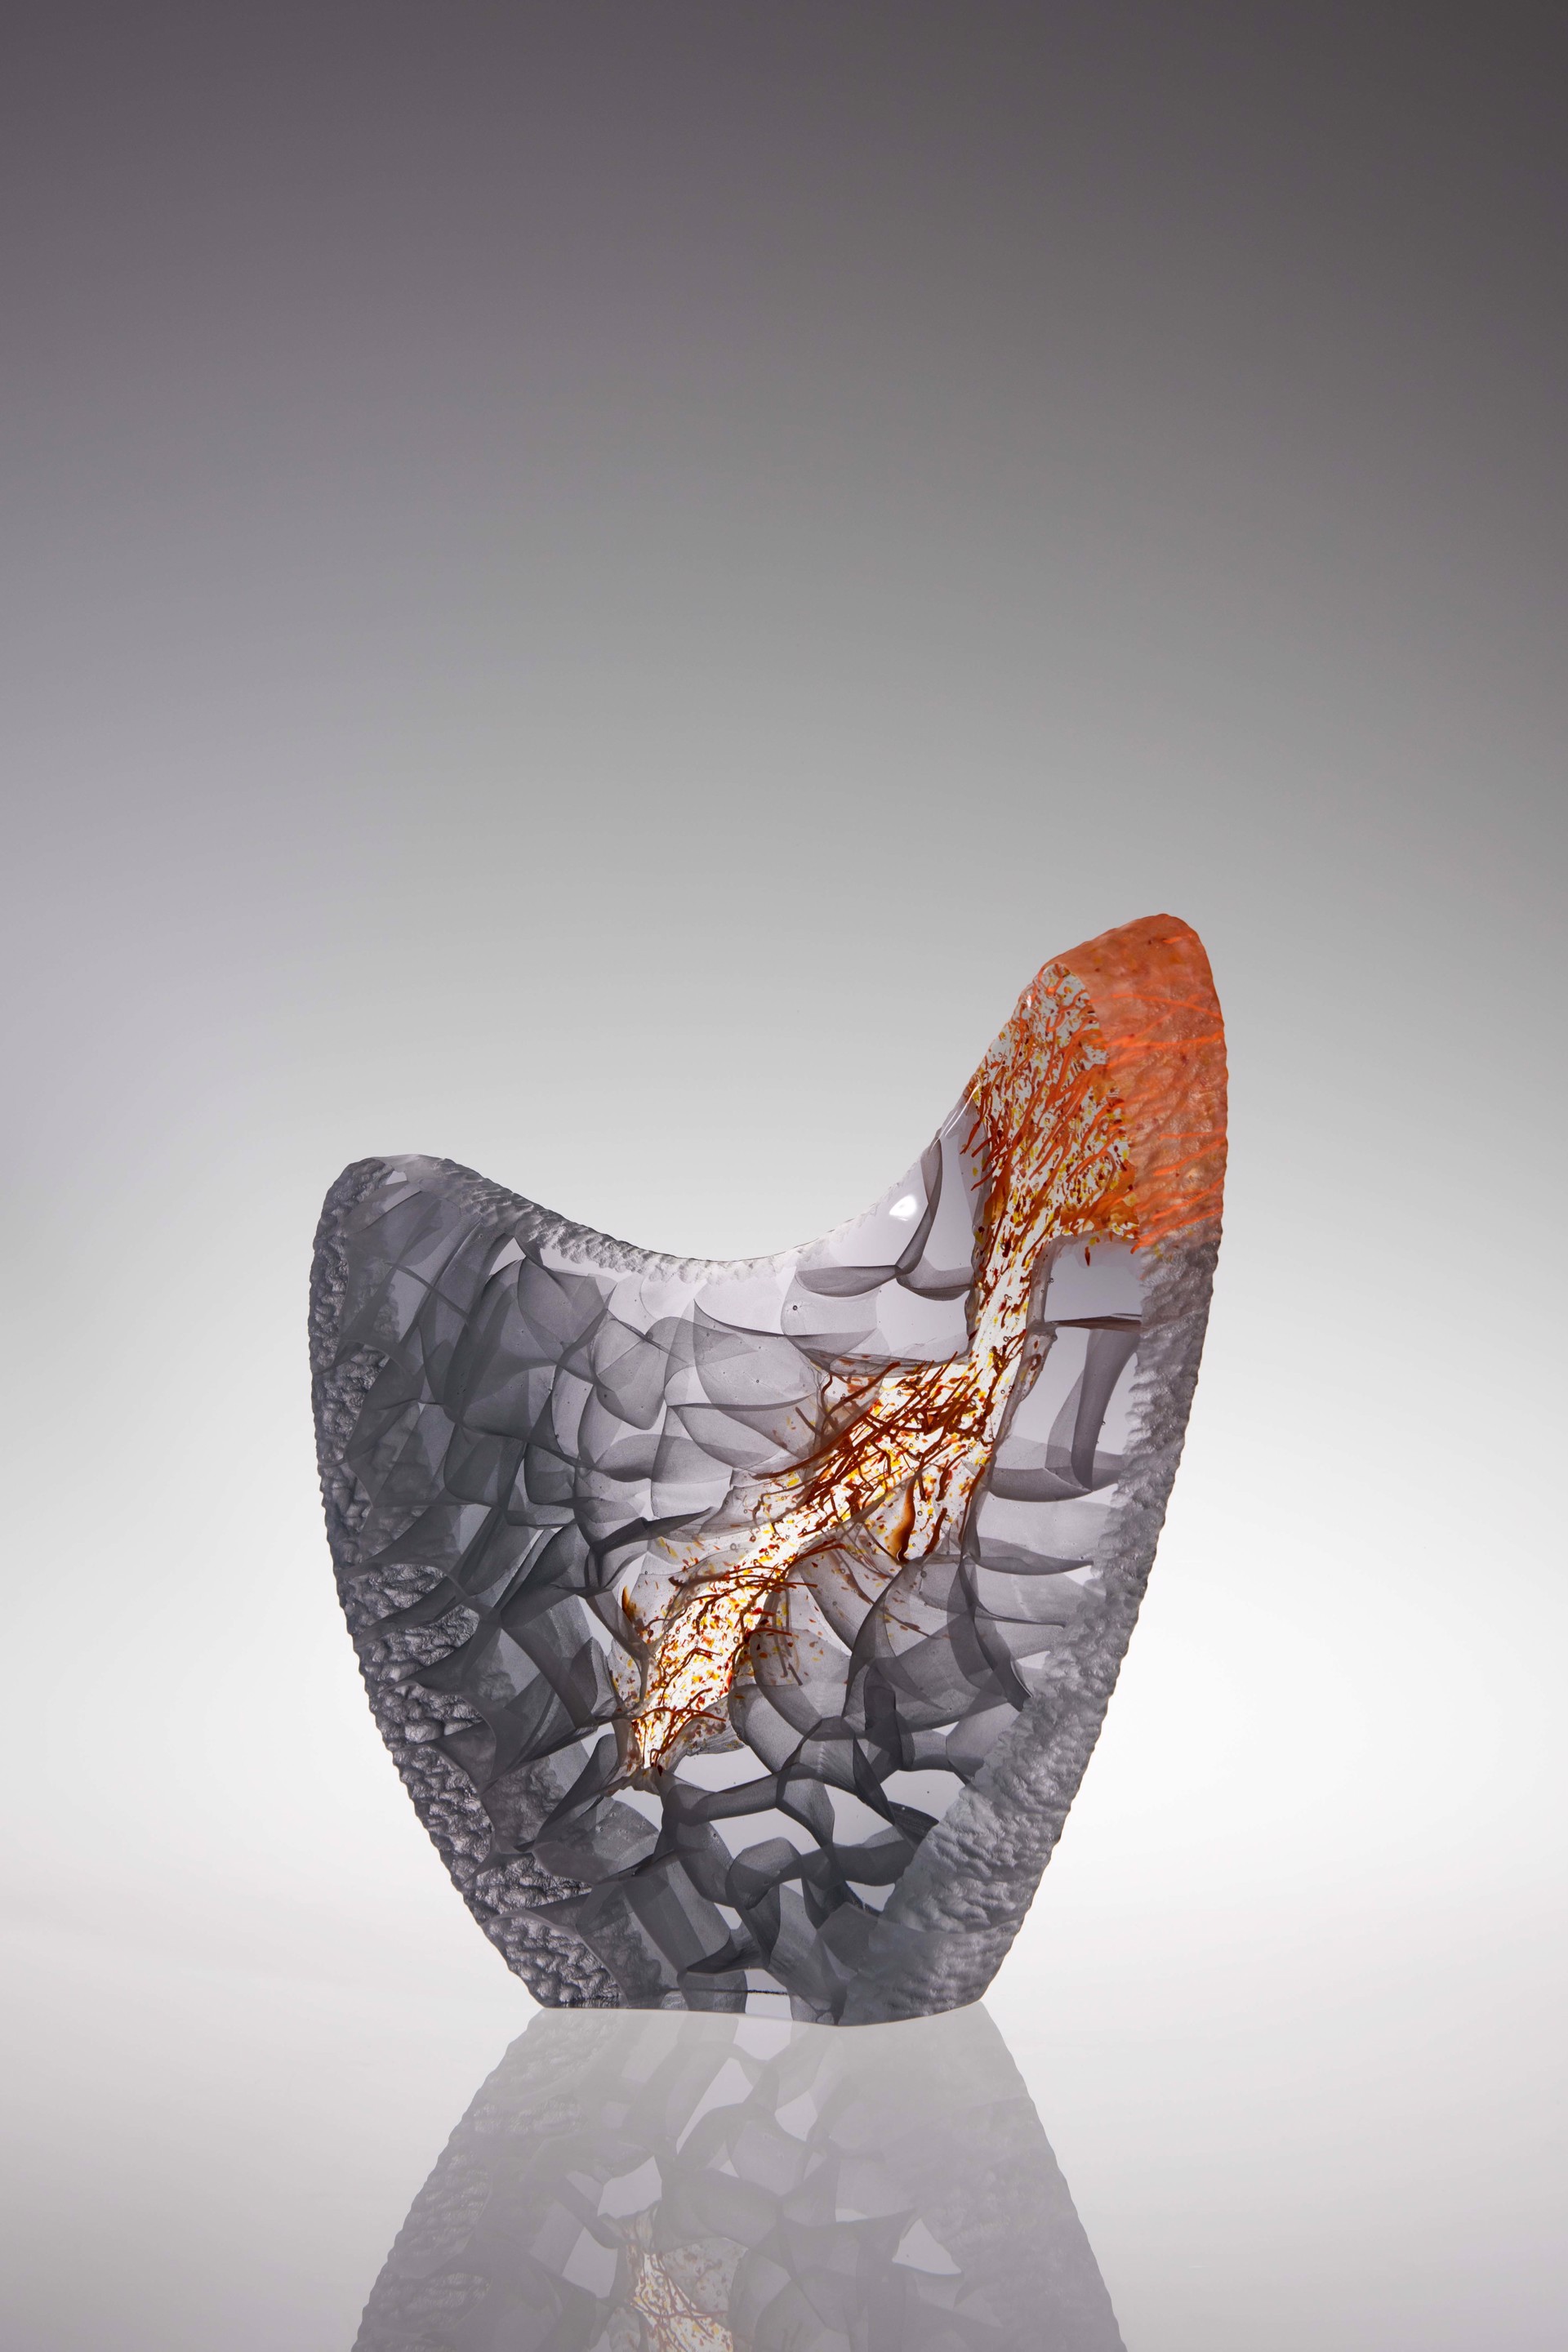 "Seaforms 2015-154" by Michael Behrens